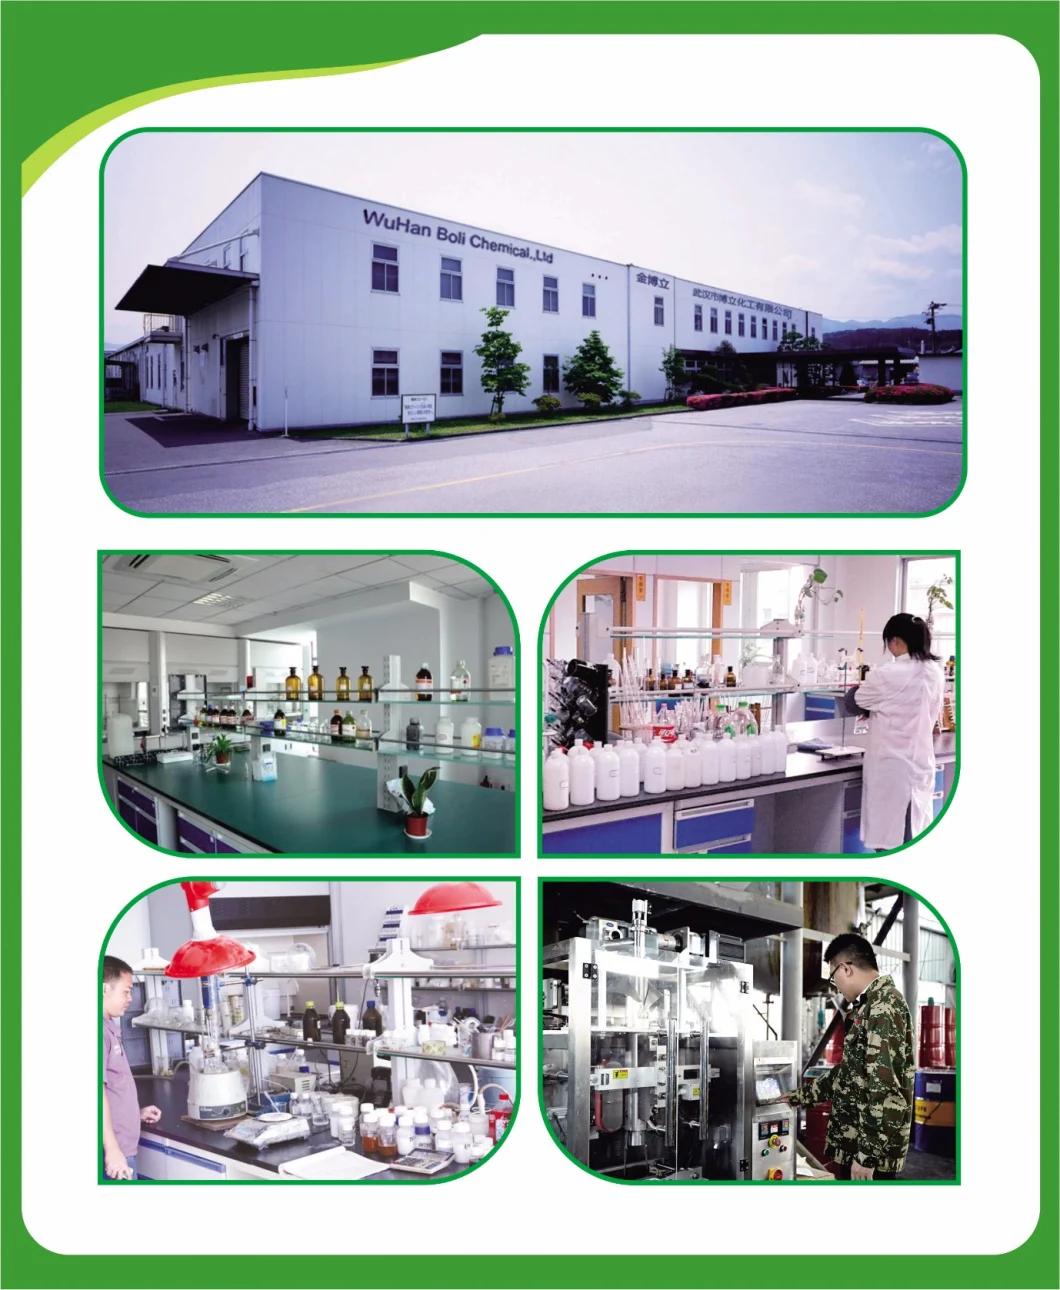 Constructional and Car Manufacturing Footwear Making Furniture Industry Favorite Good Low Cost Using Convenience Adhesive